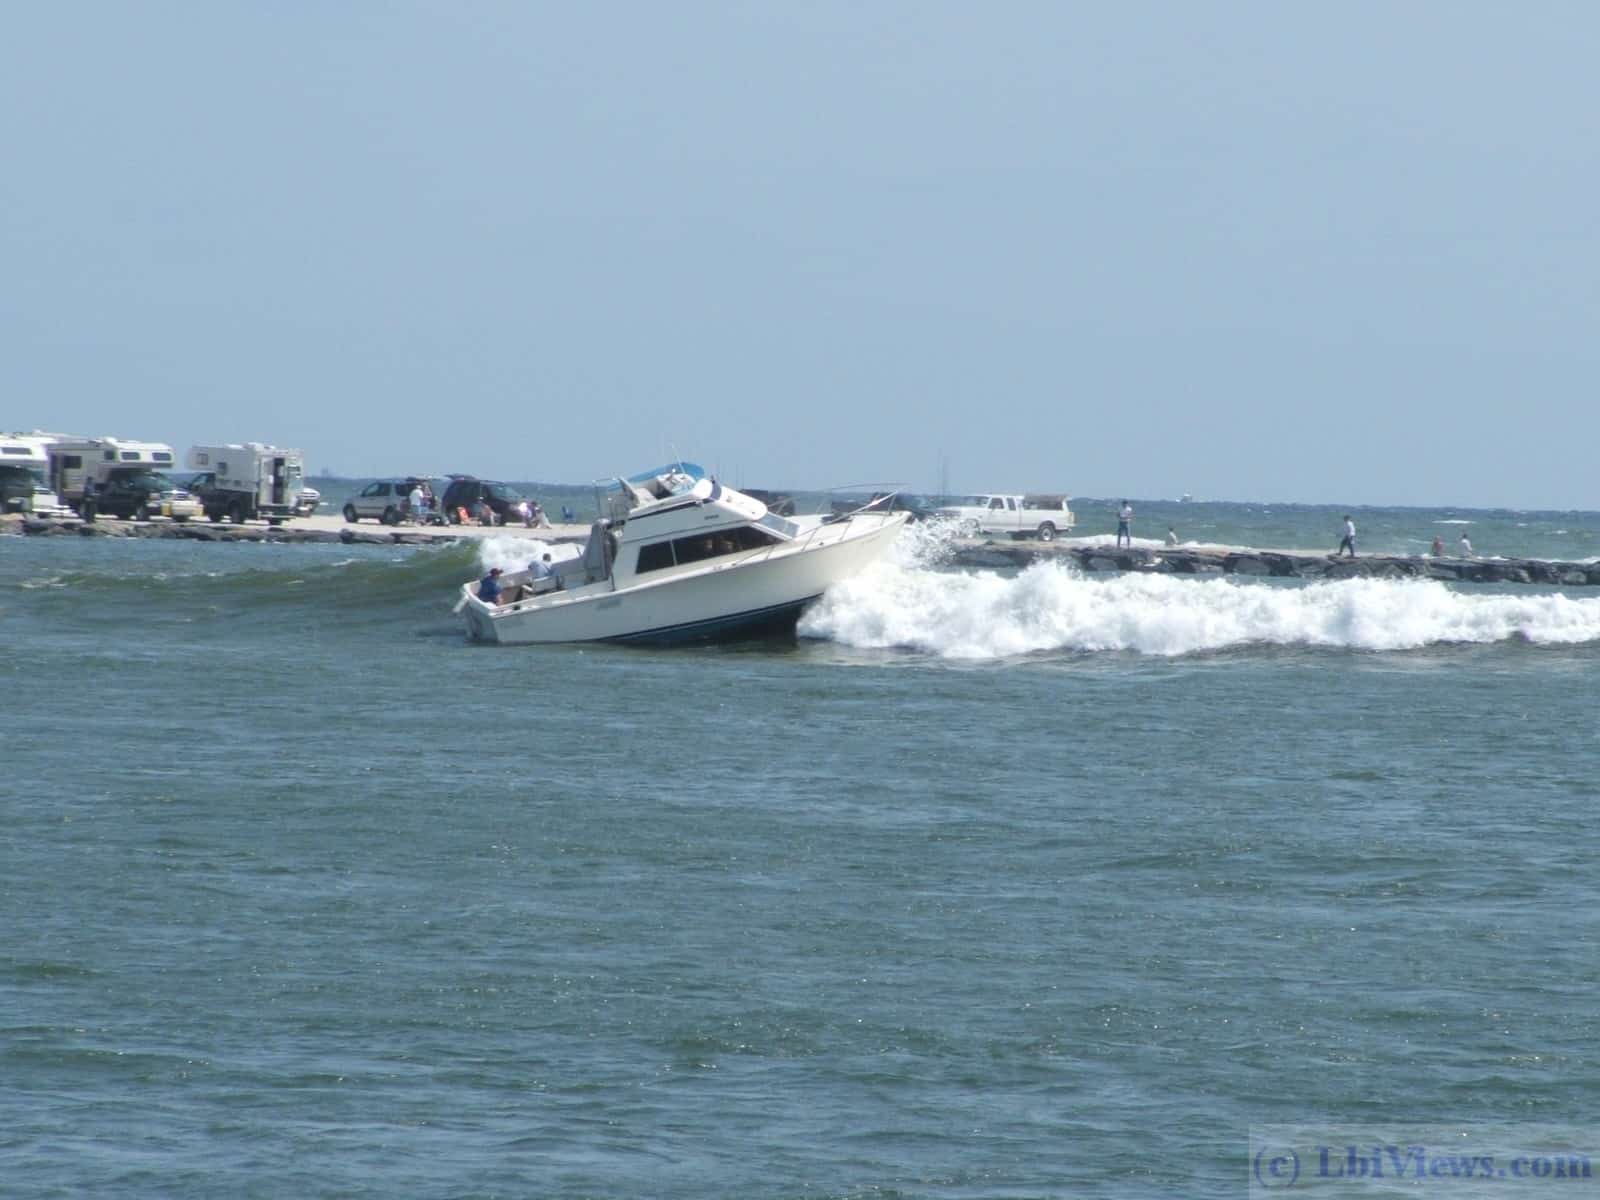 Boat heading out through the breakers in Barnegat Inlet